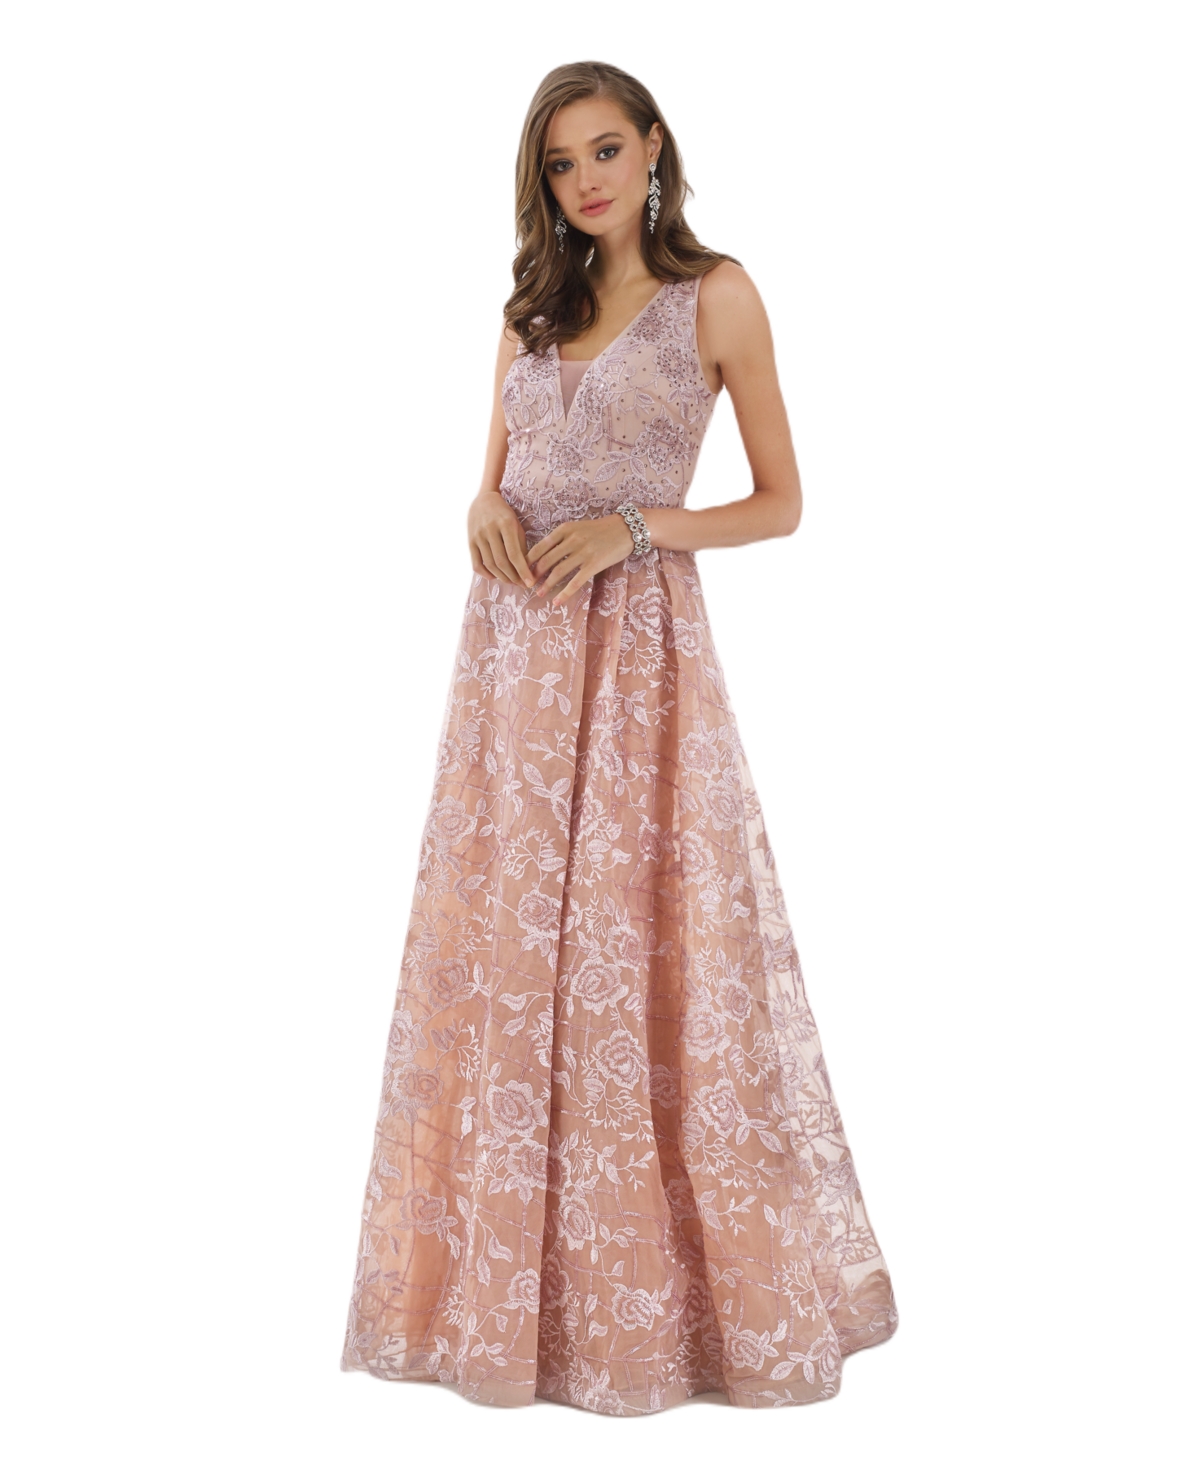 Overlap Skirt lace Ball Gown - Mauve